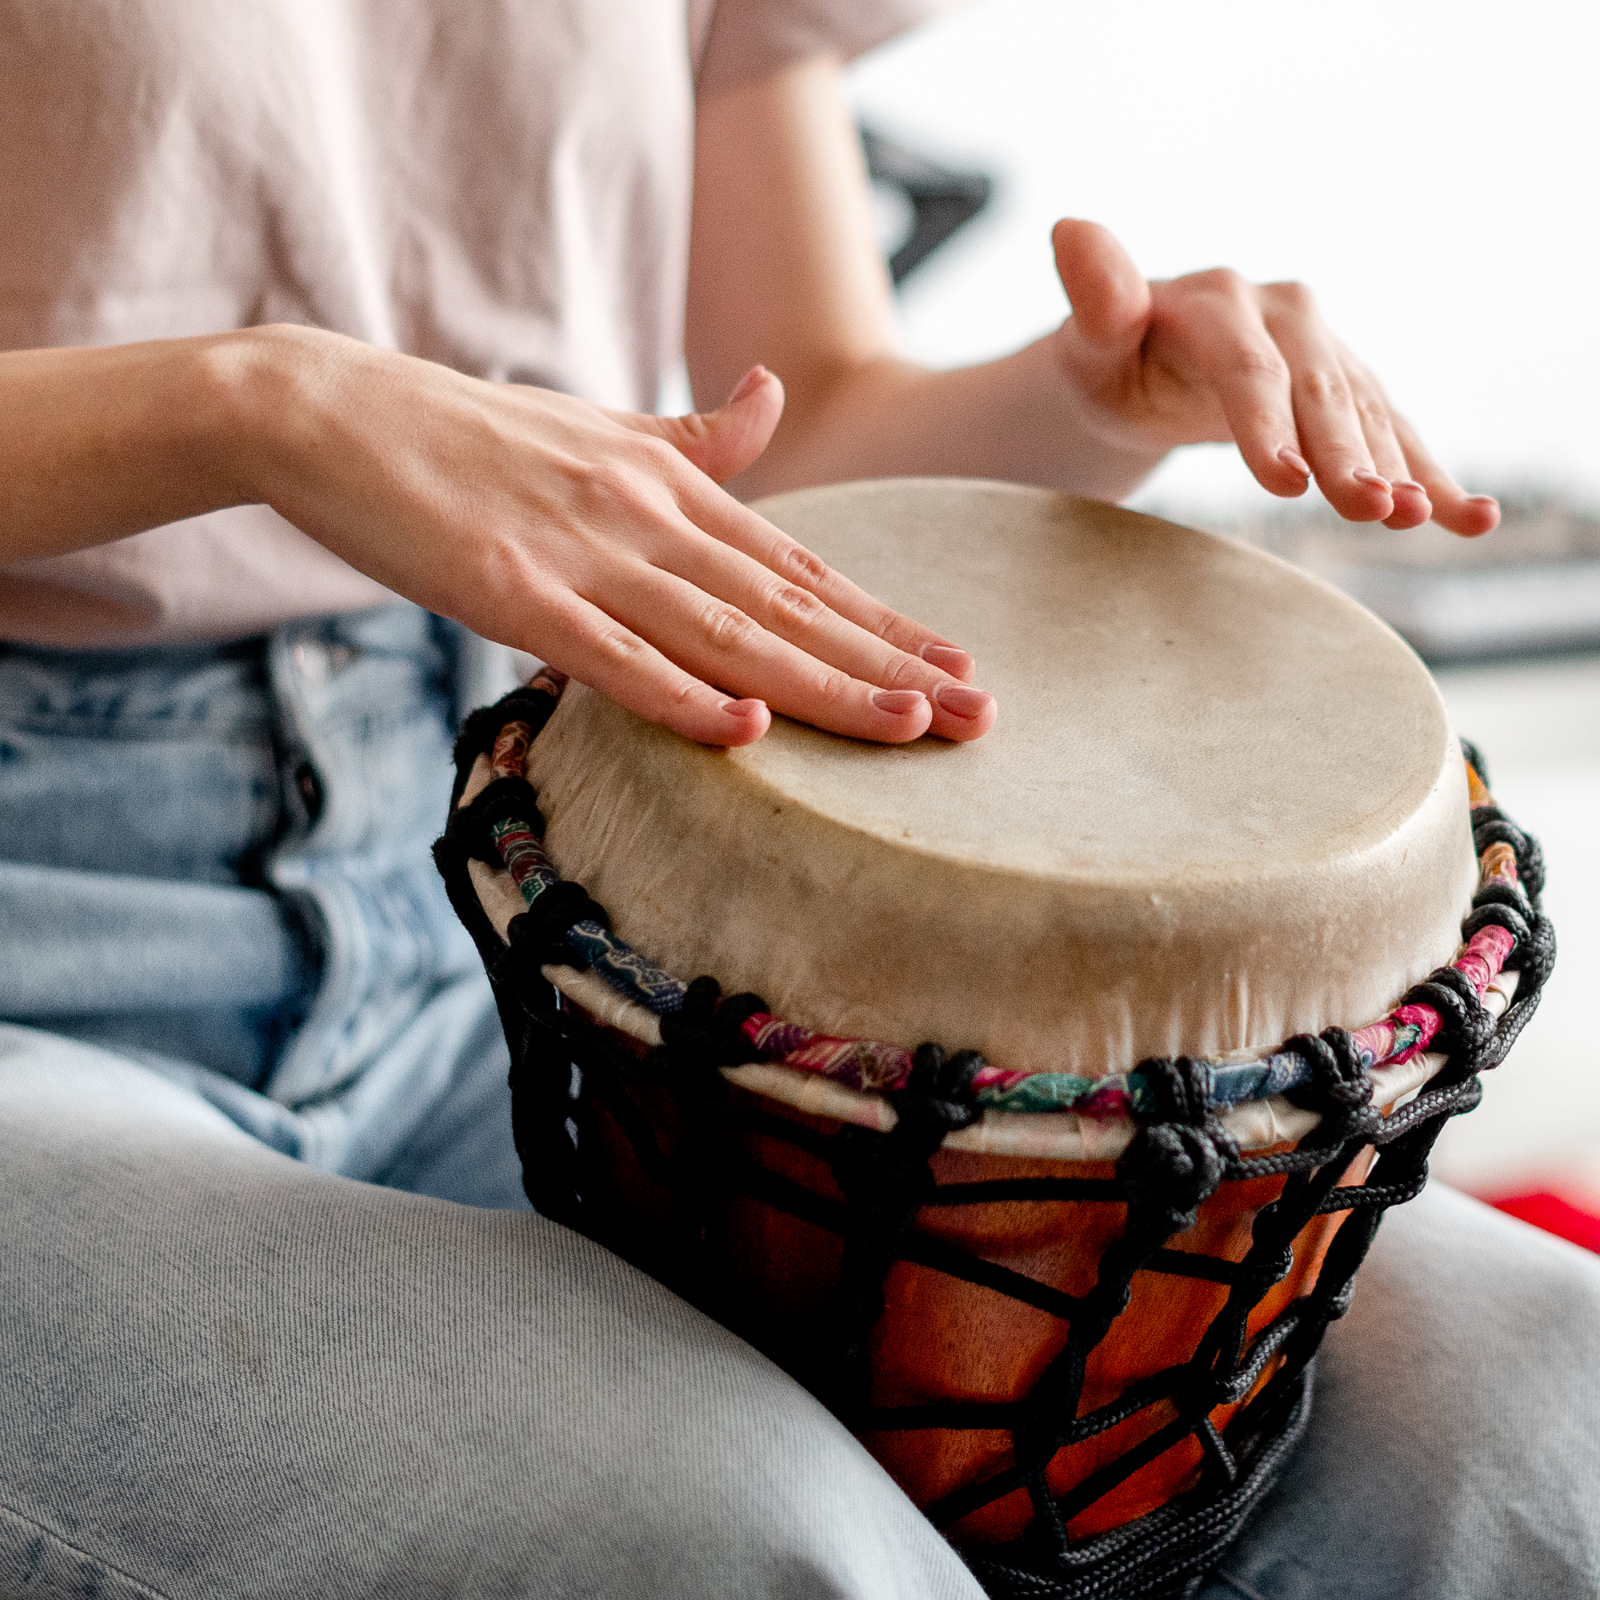 Adult djembe lesson 60 minutes : photo 1